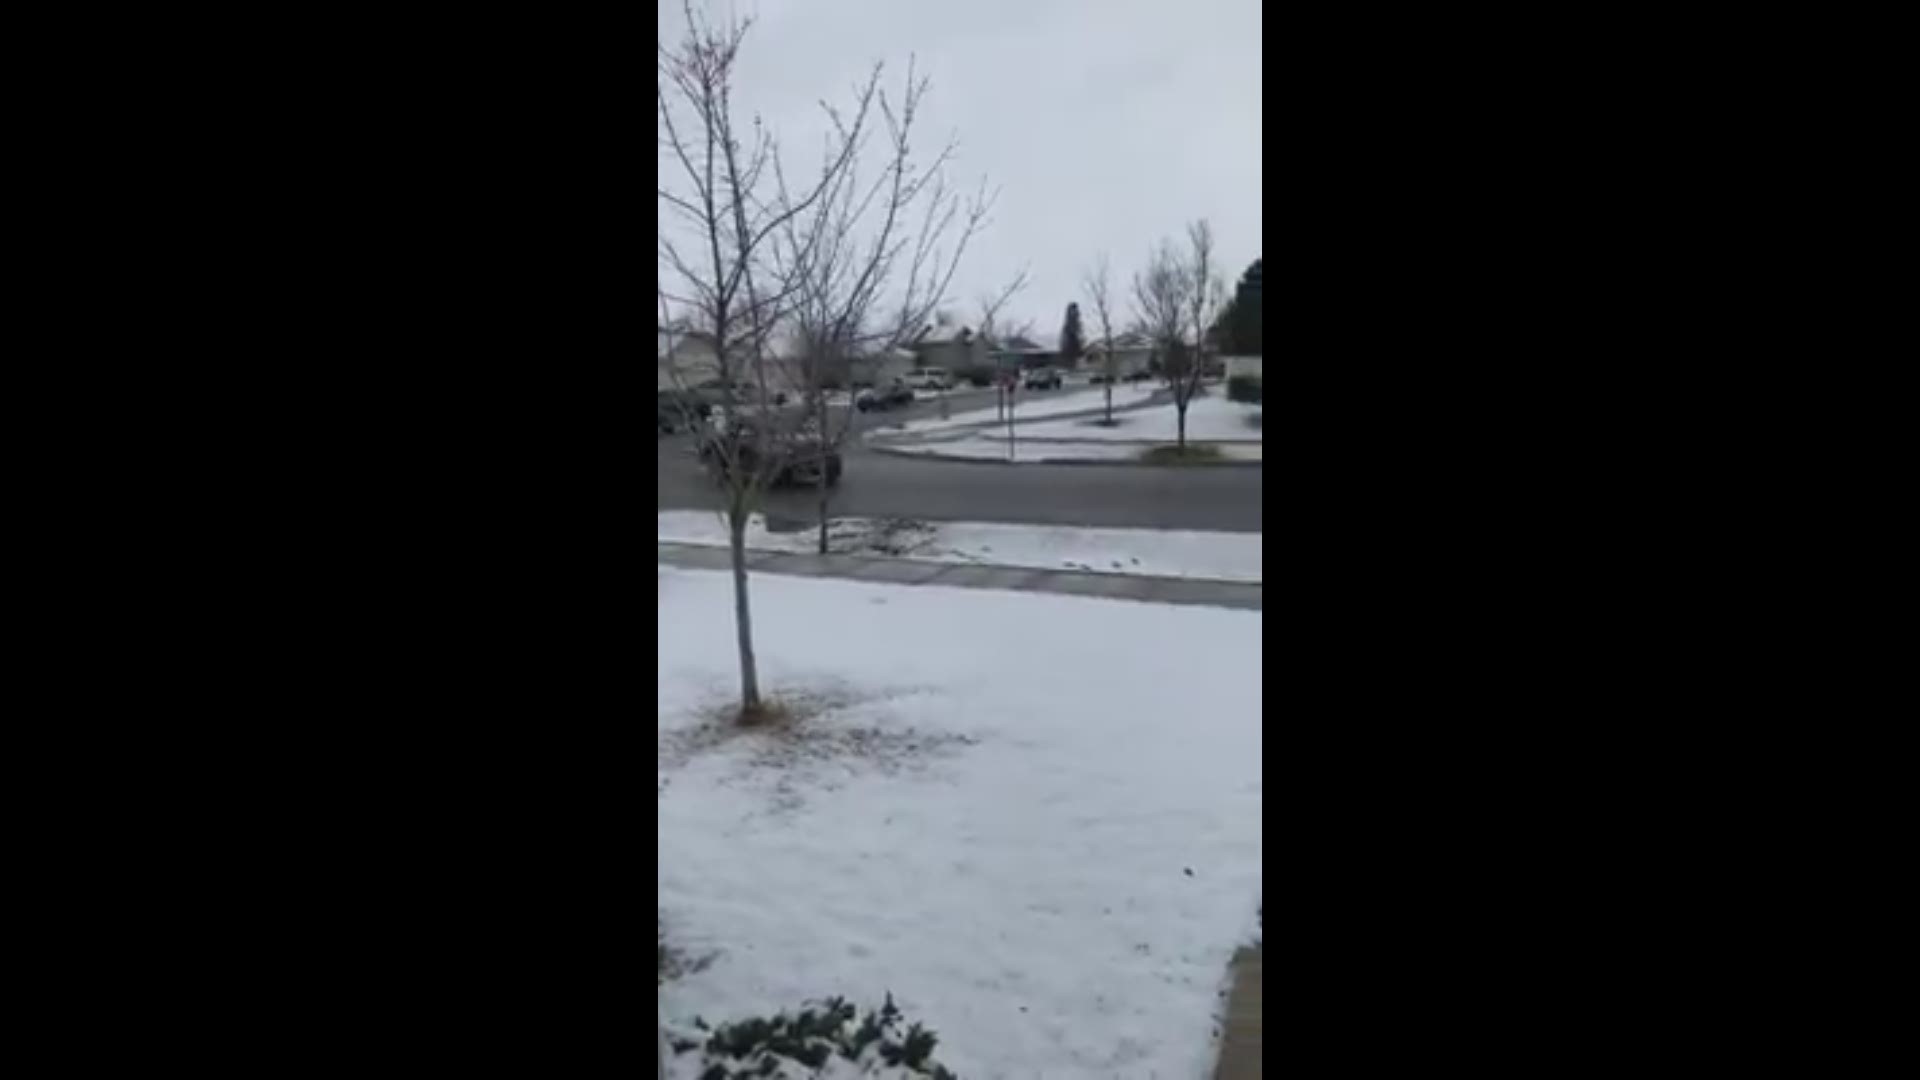 KREM viewer Joel Saccomanno sent this video of teachers driving through a Coeur d’Alene neighborhood with signs on their cars.